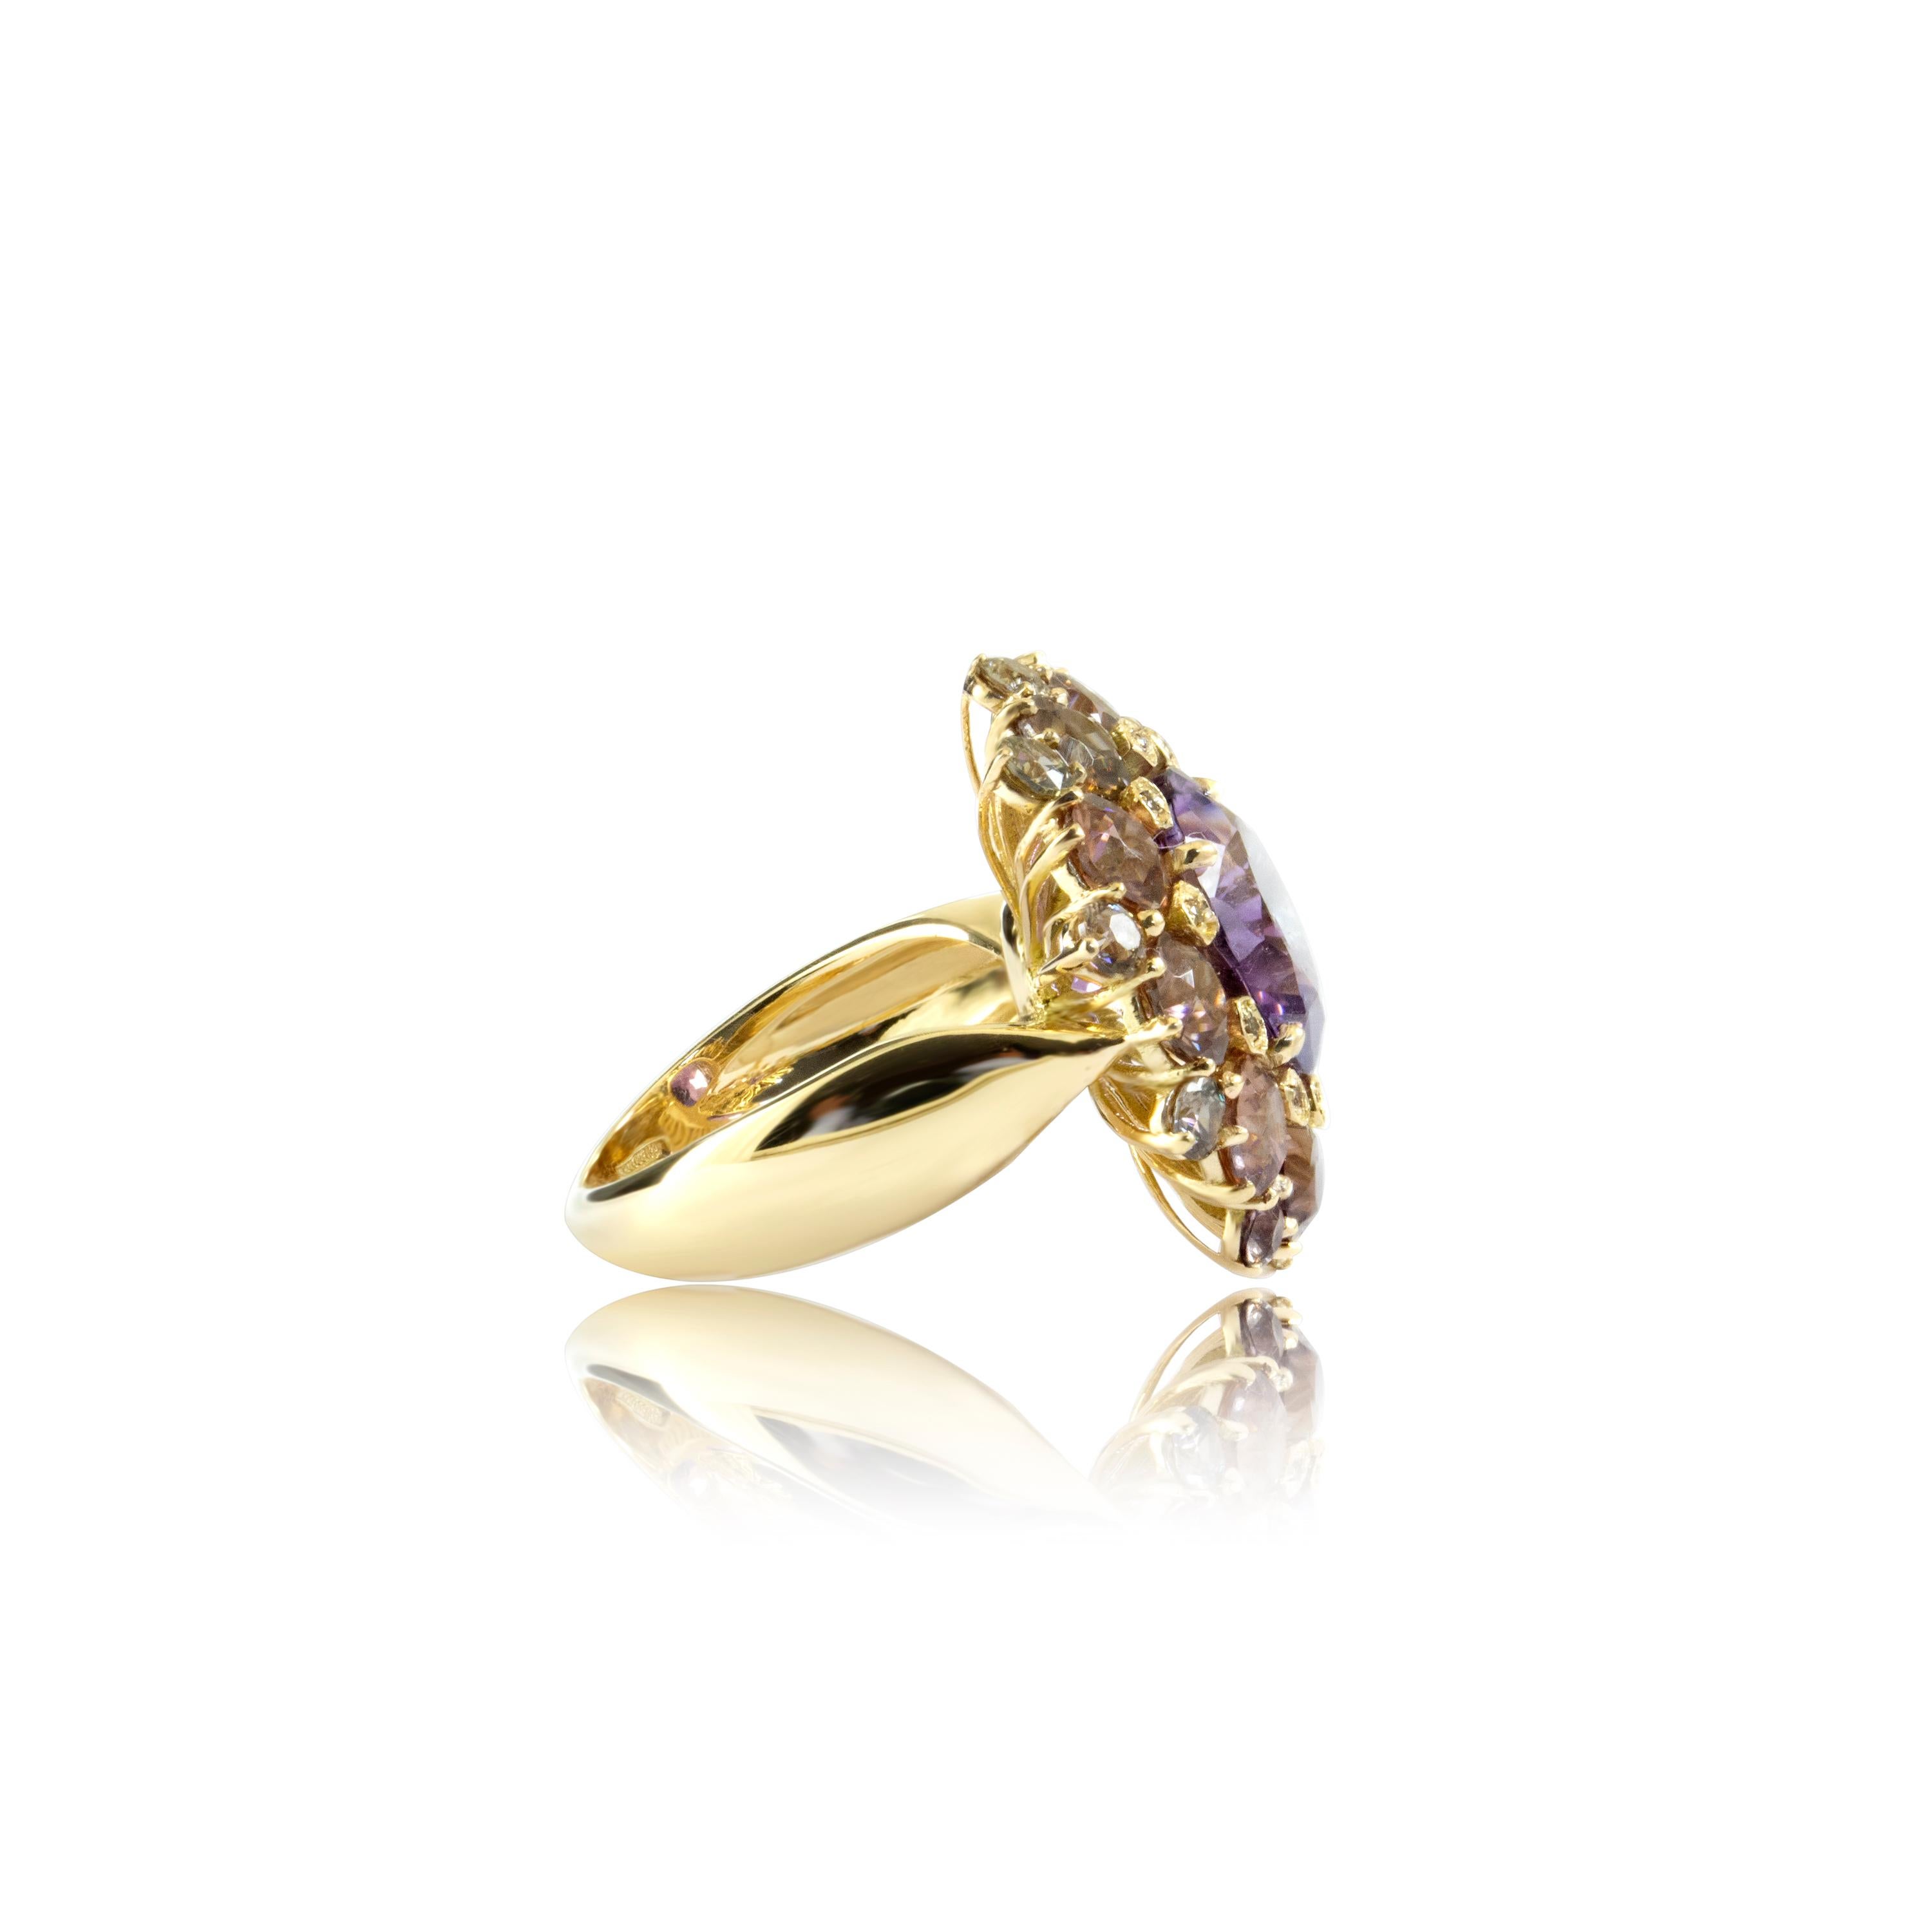 5,65ct Amethyst
0,05ct Champagne Diamonds
8,70ct Natural Zirconi
10,71gr 18kt Italian Yellow Gold
Further details such as cut sizes are available.

Designed and made during the March lockdown in Italy, this beauty is the product of time where